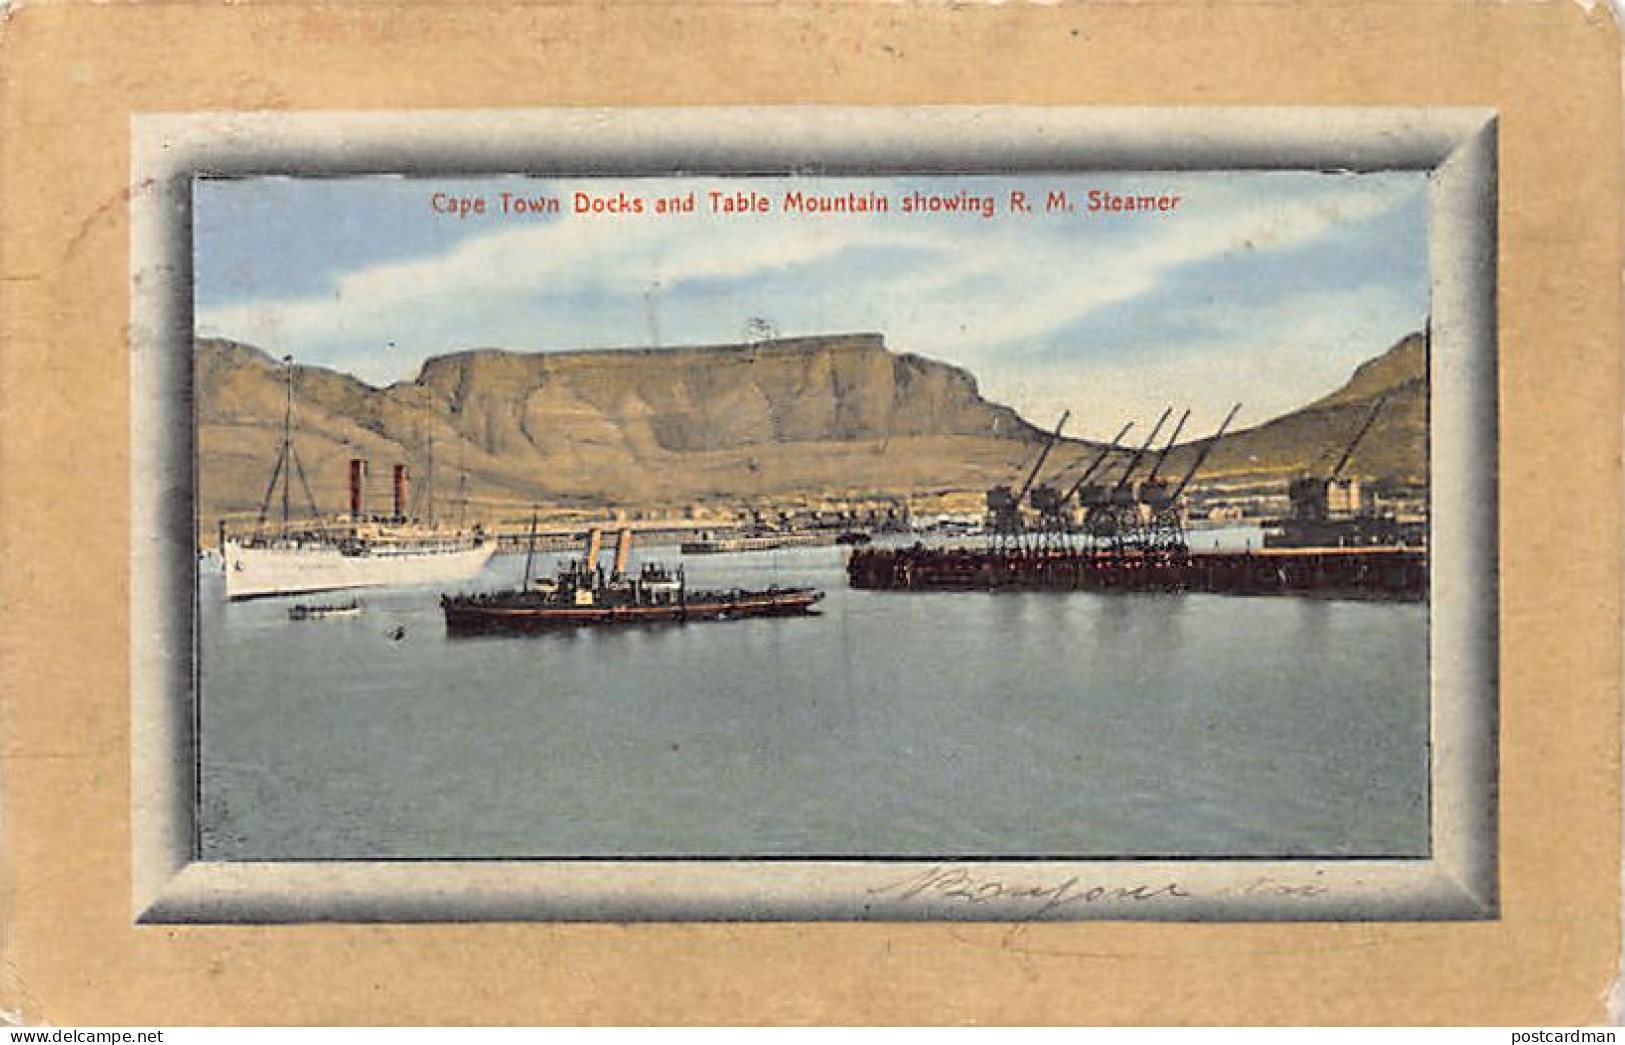 South Africa - CAPE TOWN - Docks And Table Mountain Showing Royal Mail Steamer - Publ. Spes Bona Series  - Afrique Du Sud